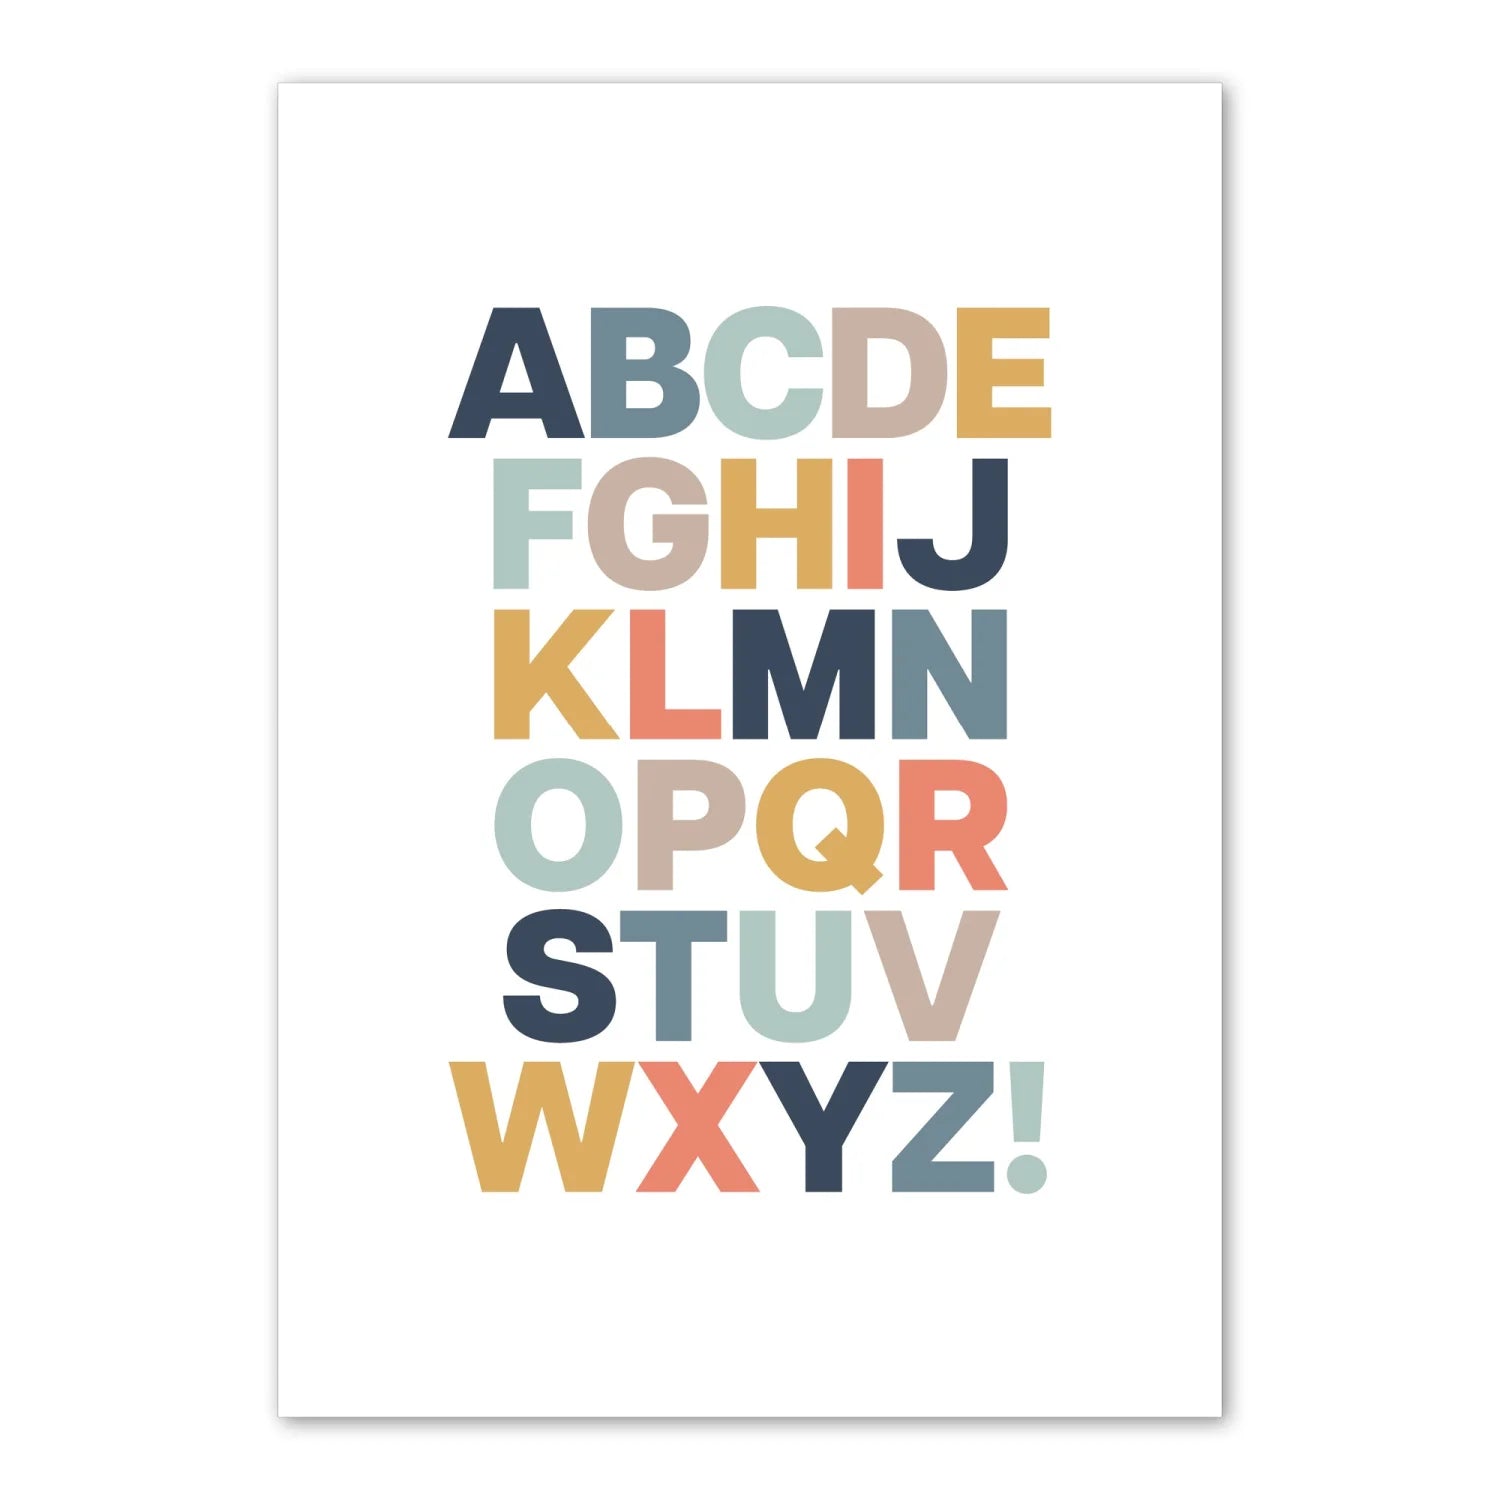 Star~Fish and Bold Alphabet Print - Prints By The Sea